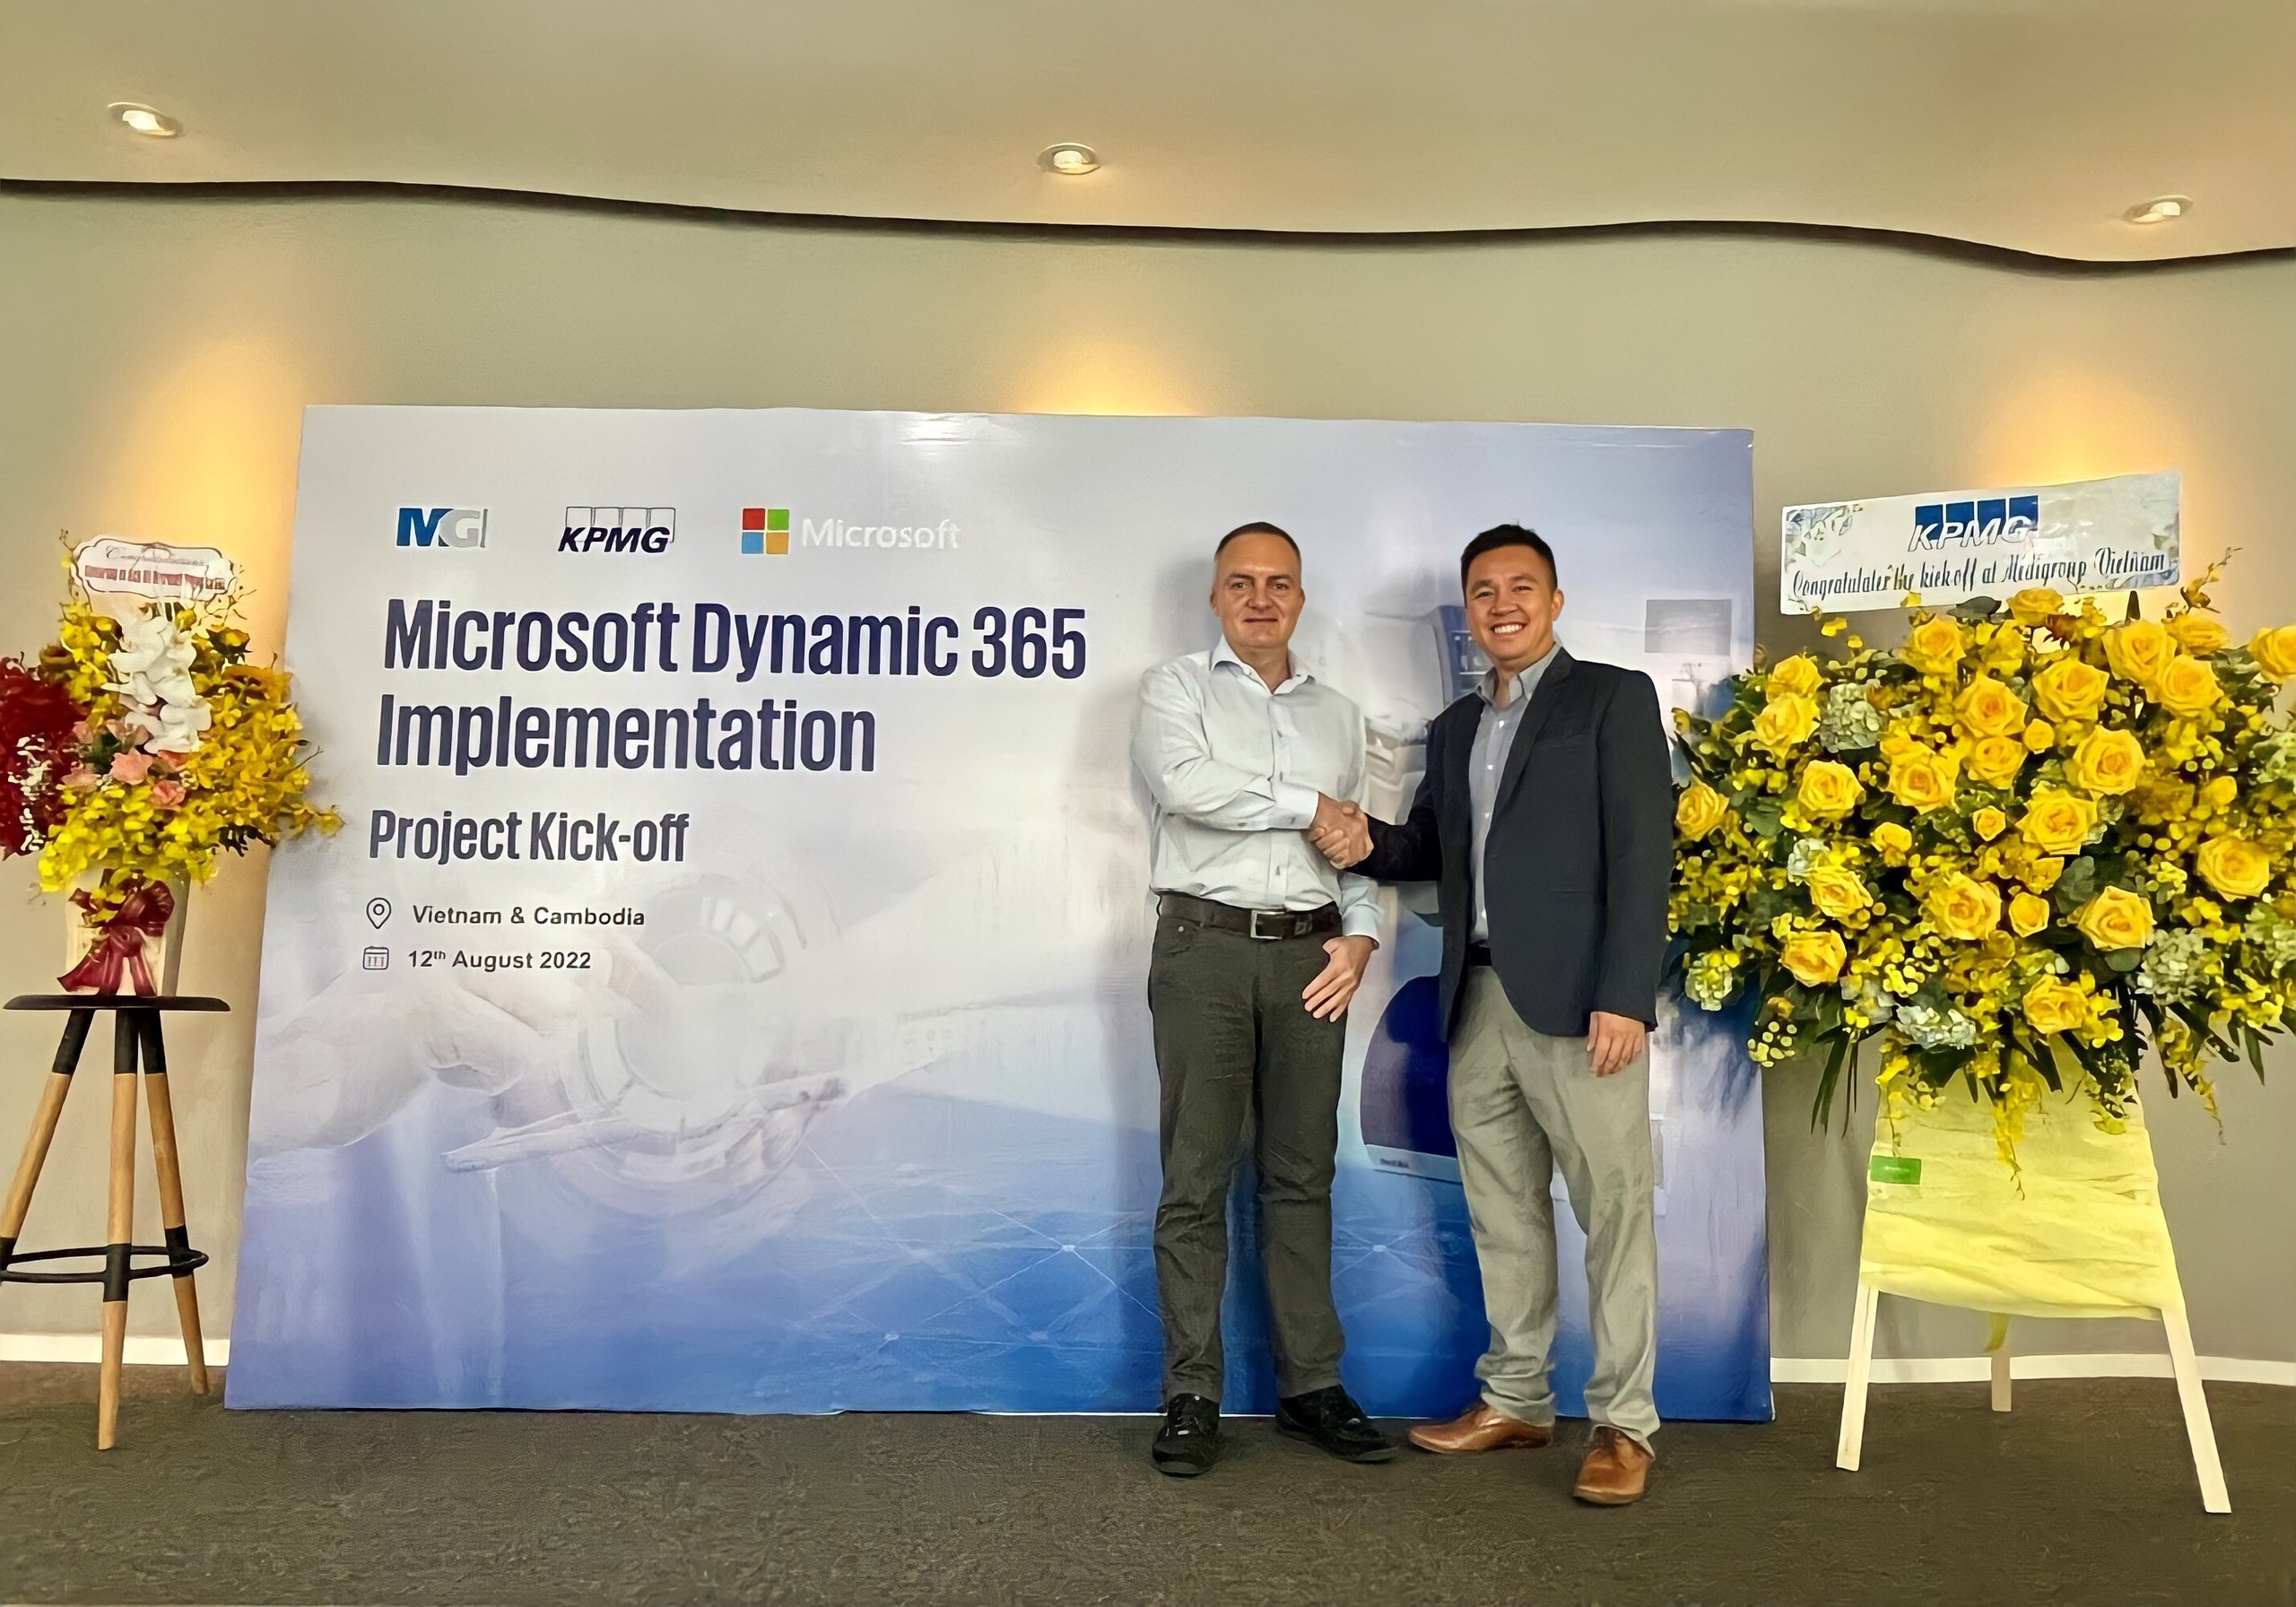 MEDIGROUP KPMG in Vietnam officially launched the Microsoft Dynamics 365 Finance operations project